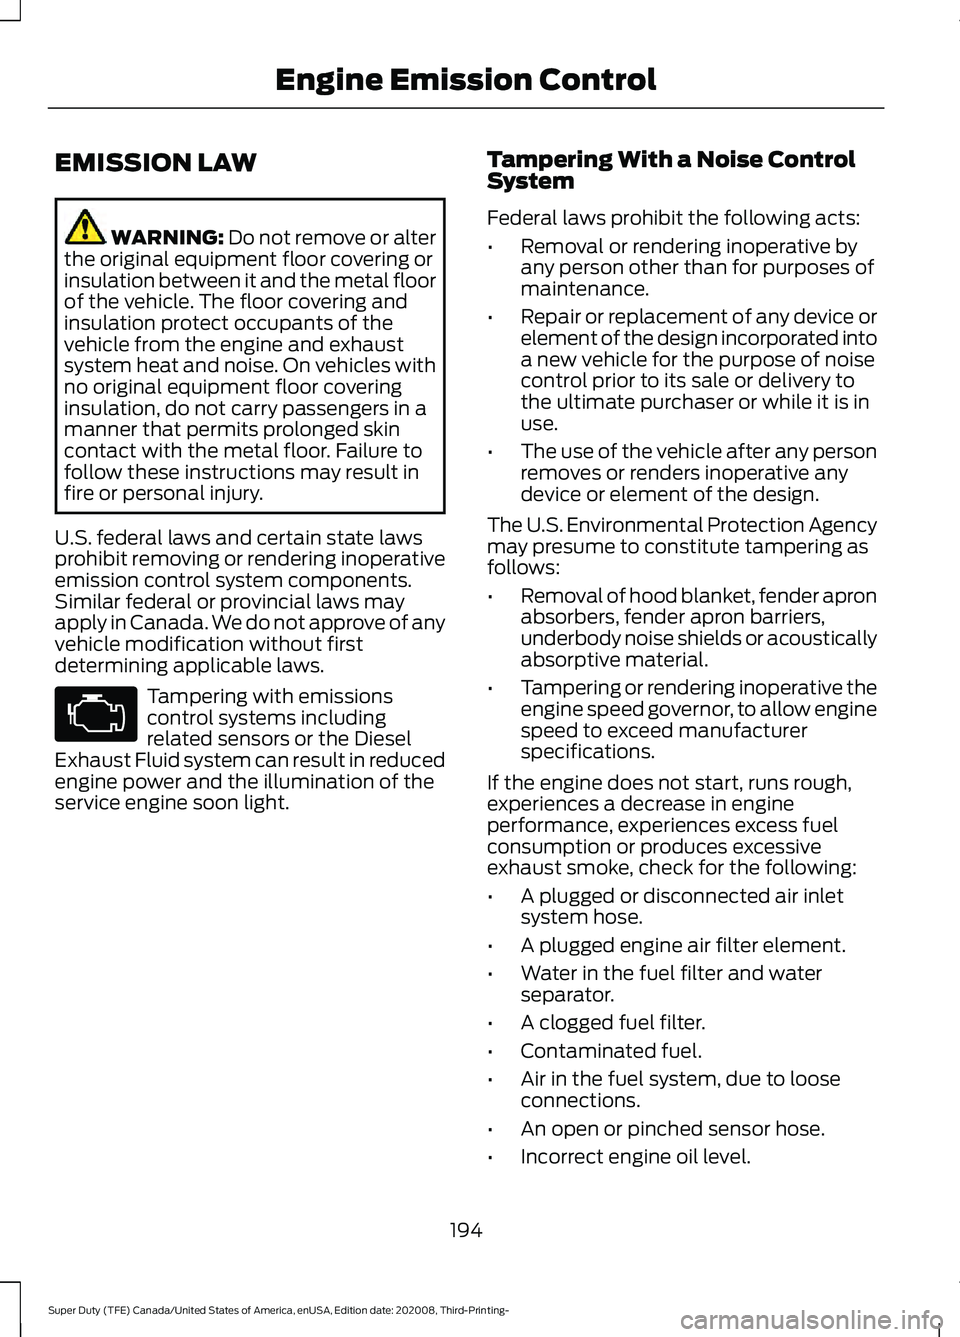 FORD F-350 2021  Owners Manual EMISSION LAW
WARNING: Do not remove or alter
the original equipment floor covering or
insulation between it and the metal floor
of the vehicle. The floor covering and
insulation protect occupants of t